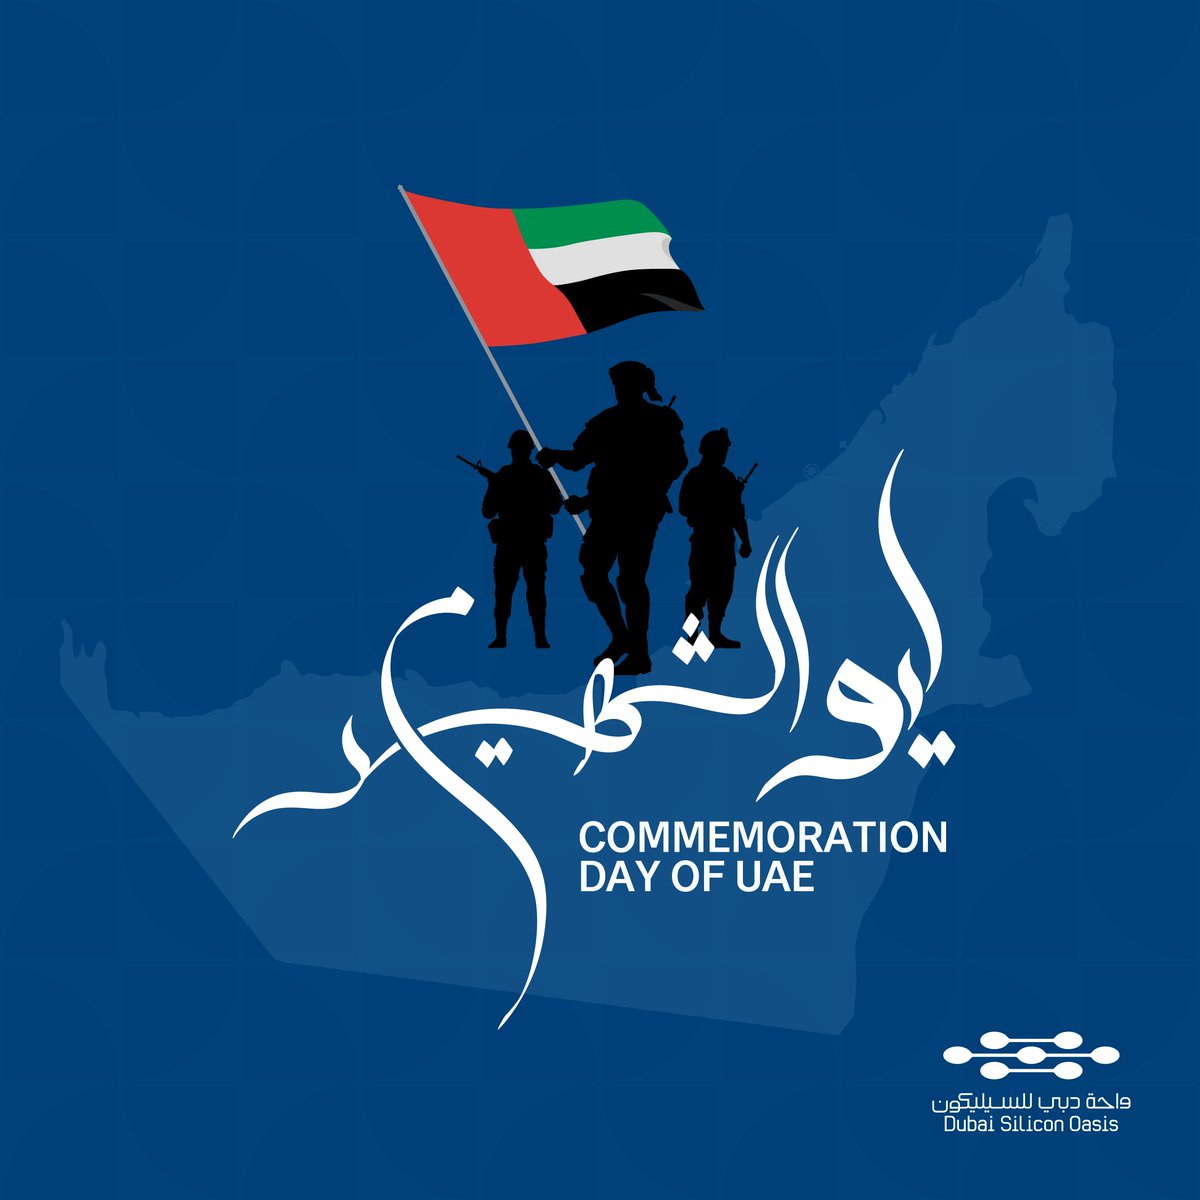 On this UAE Commemoration Day, we honour our heroes and their noble sacrifices. They remain etched in our memories with immense pride and enduring gratitude. #Dubaisiliconoasis #dso #Dubaidigitalpark #UAECommemorationDay